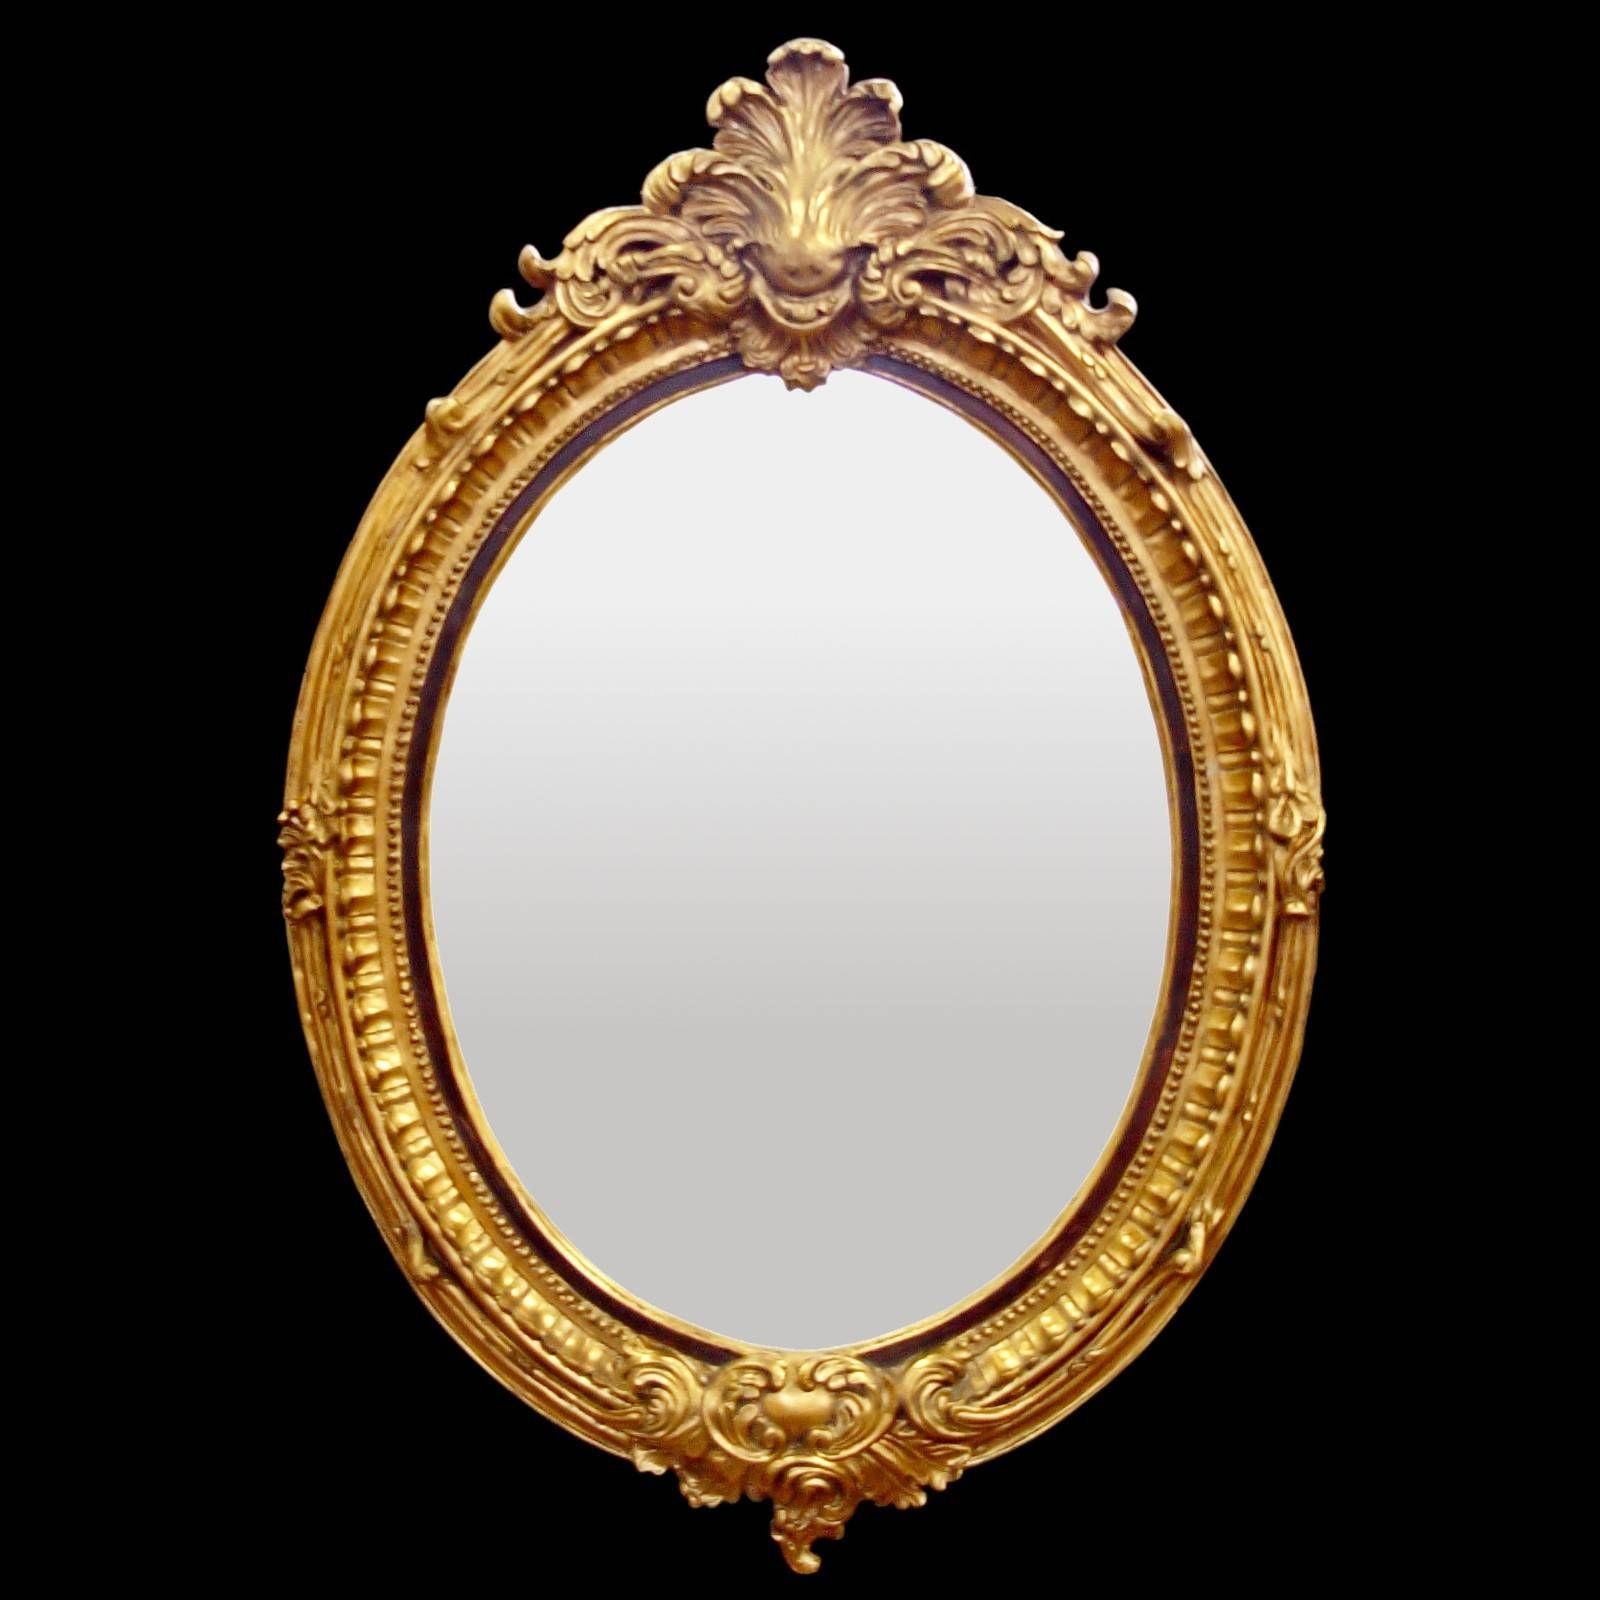 Baroque Hall Mirror Oval Wall Mirror Gold Color Red Leaf Motif Pertaining To Gold Baroque Mirrors (View 8 of 15)